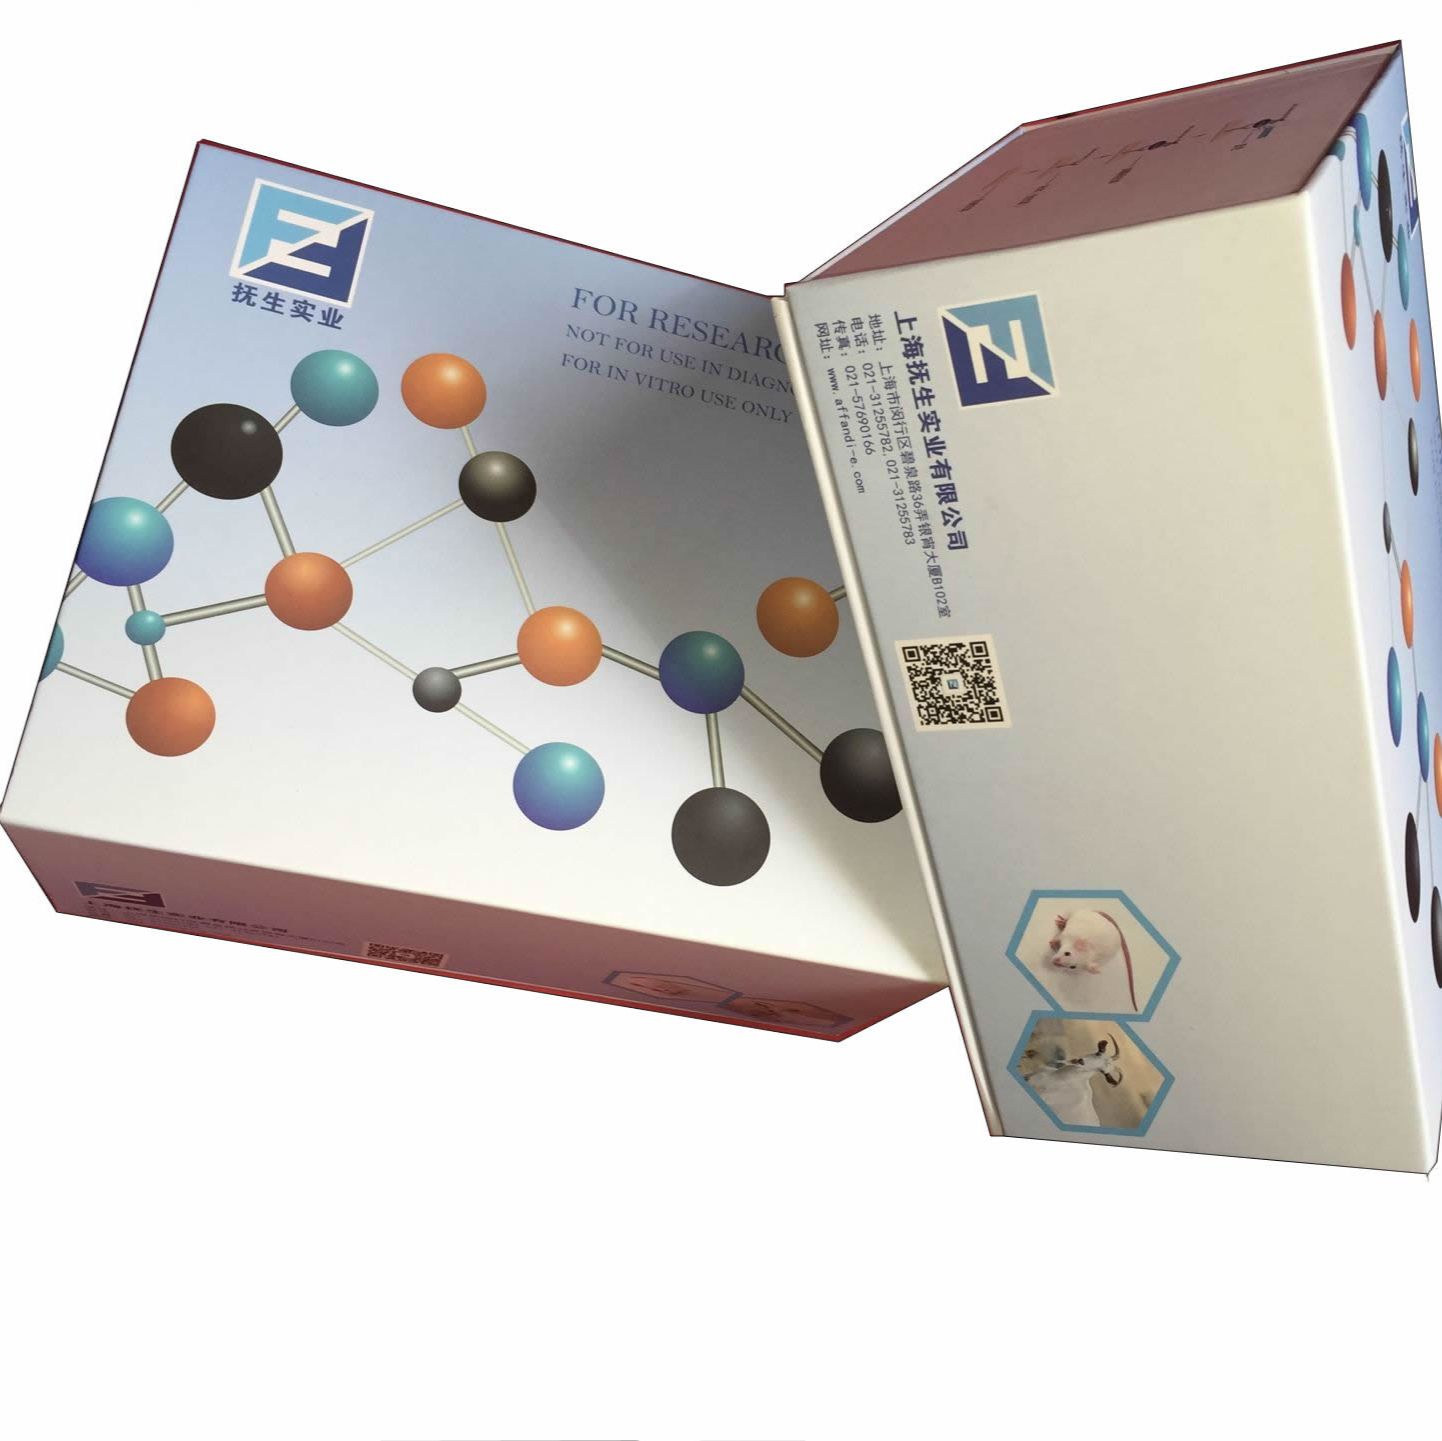 FOR NLR family CARD domain-containing protein 4 ELISA Kit